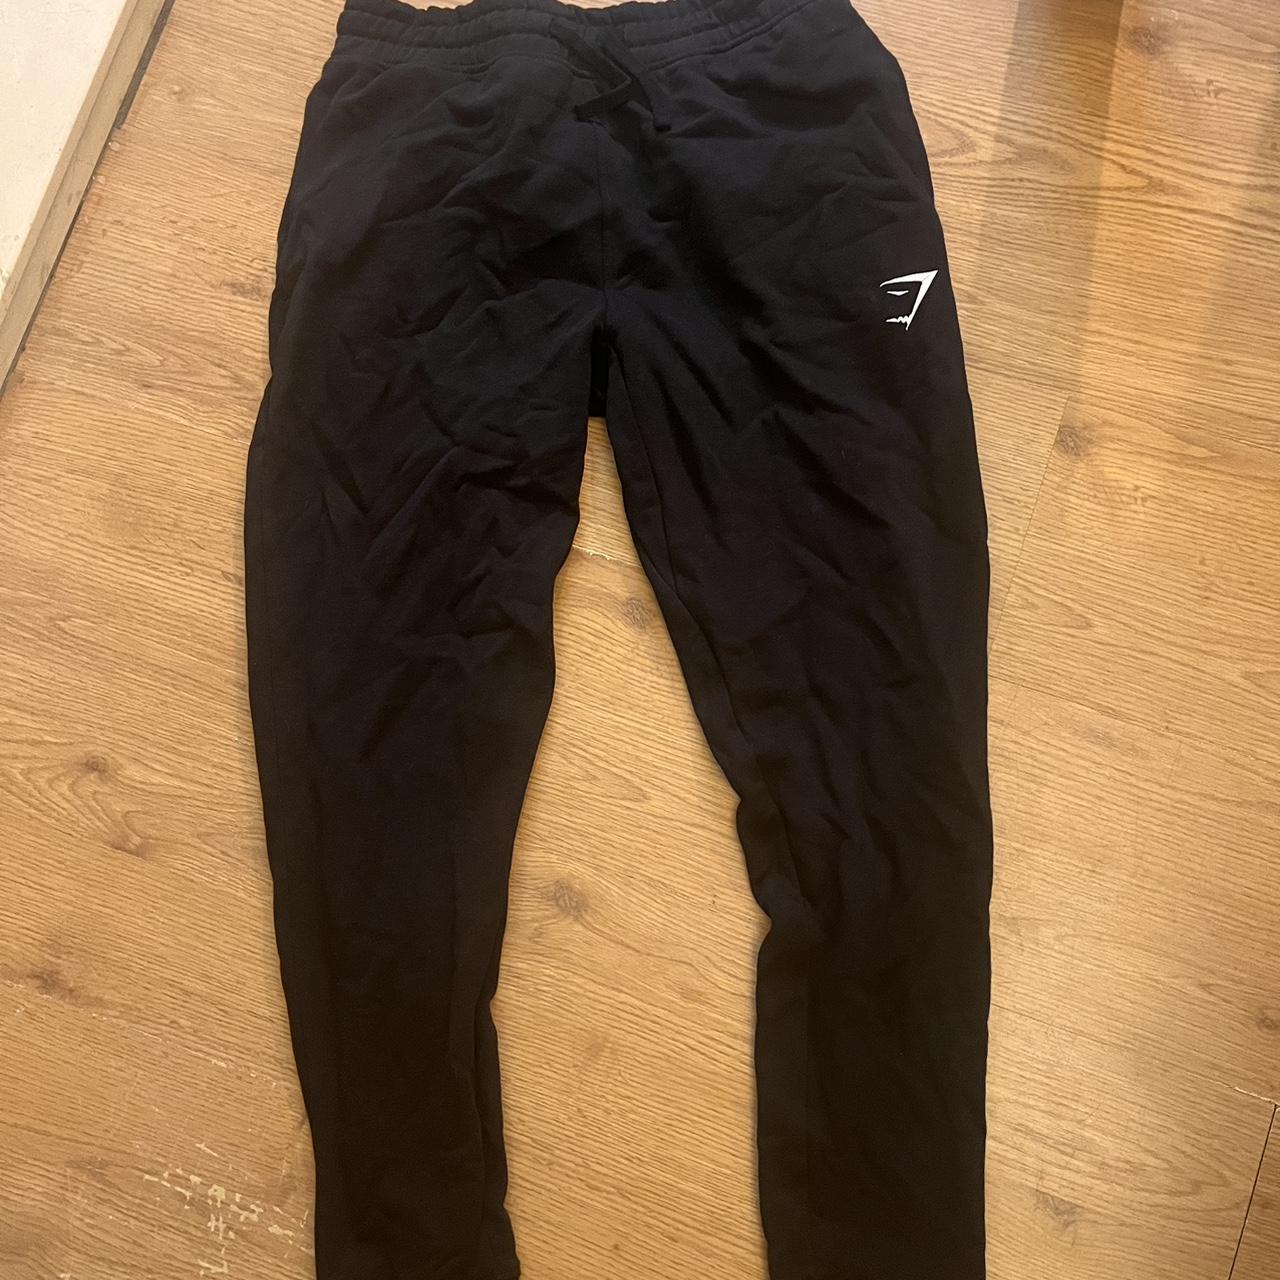 Release joggers from Gymshark. Cream color. Small - Depop